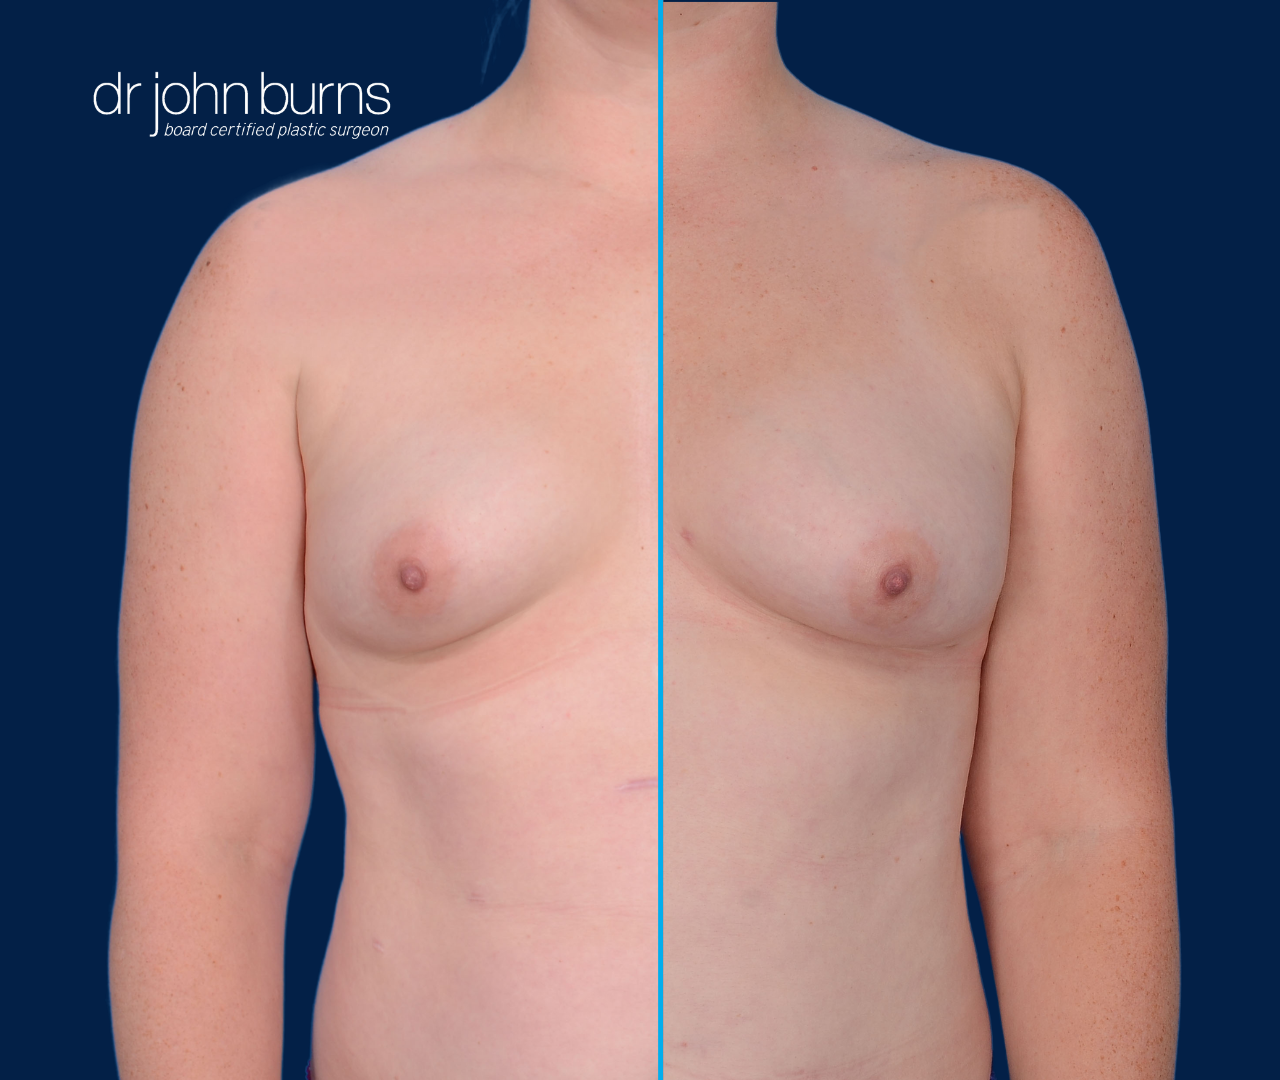 case 16- split screen before & after fat transfer to breast by top plastic surgeon, Dr. John Burns